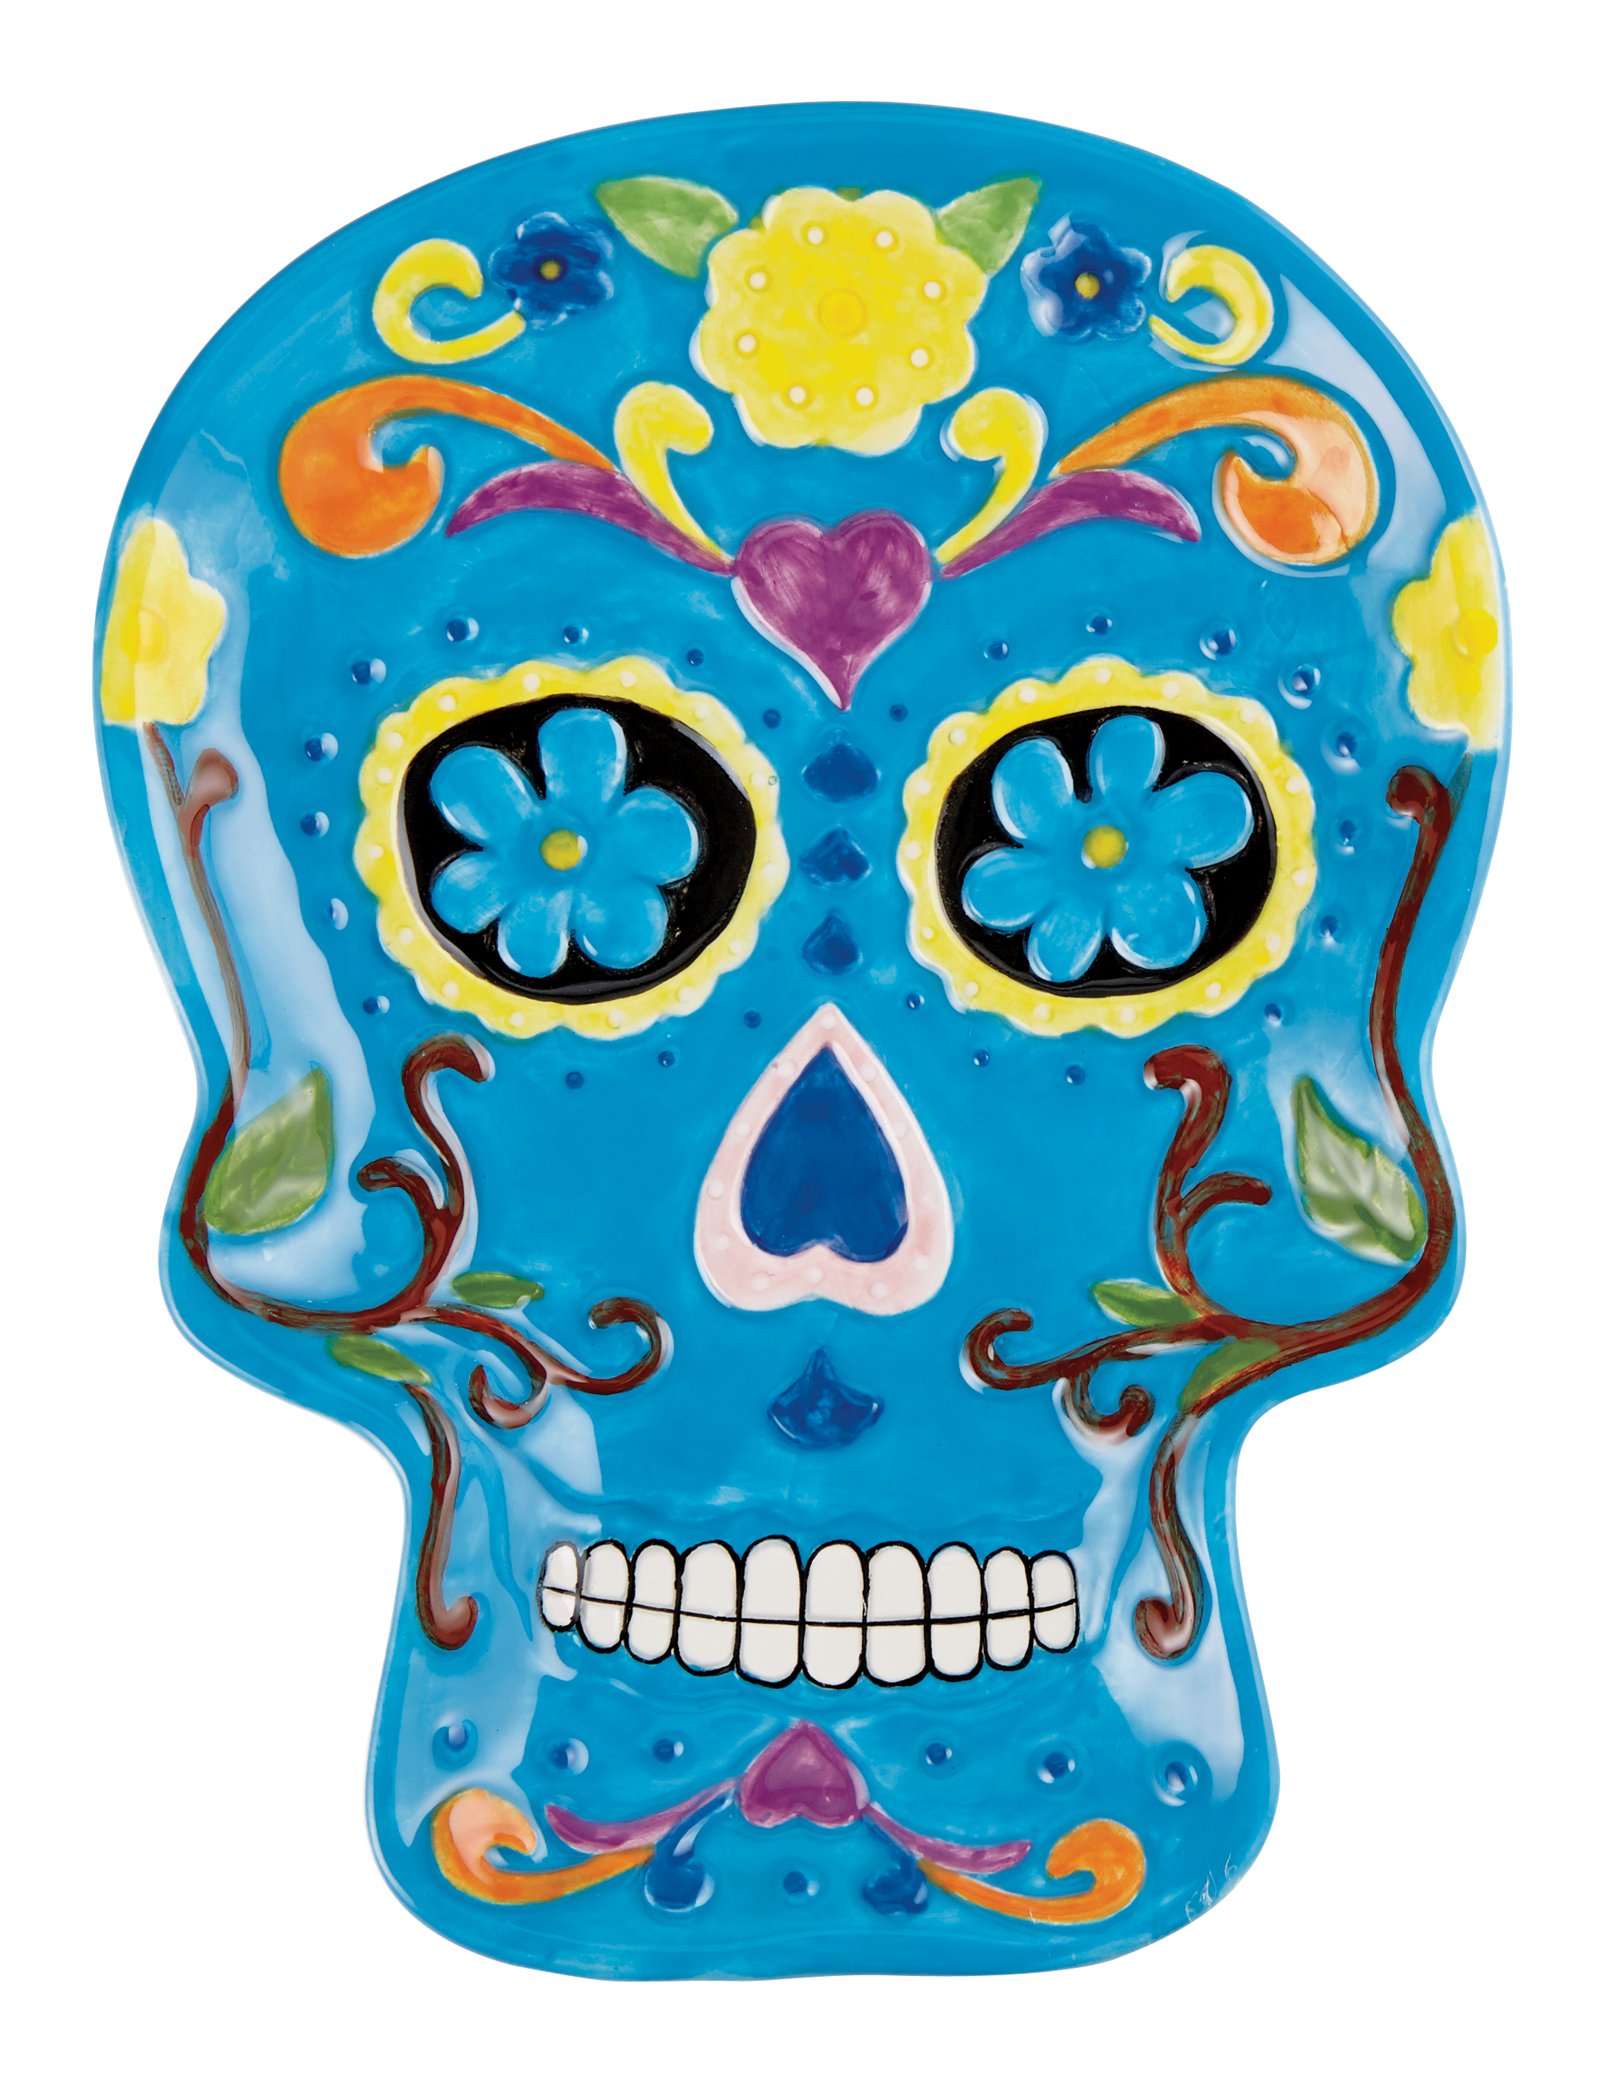 Holiday Market Day of the Dead Sugar Skull Candy Plate, Blue - Shop ...